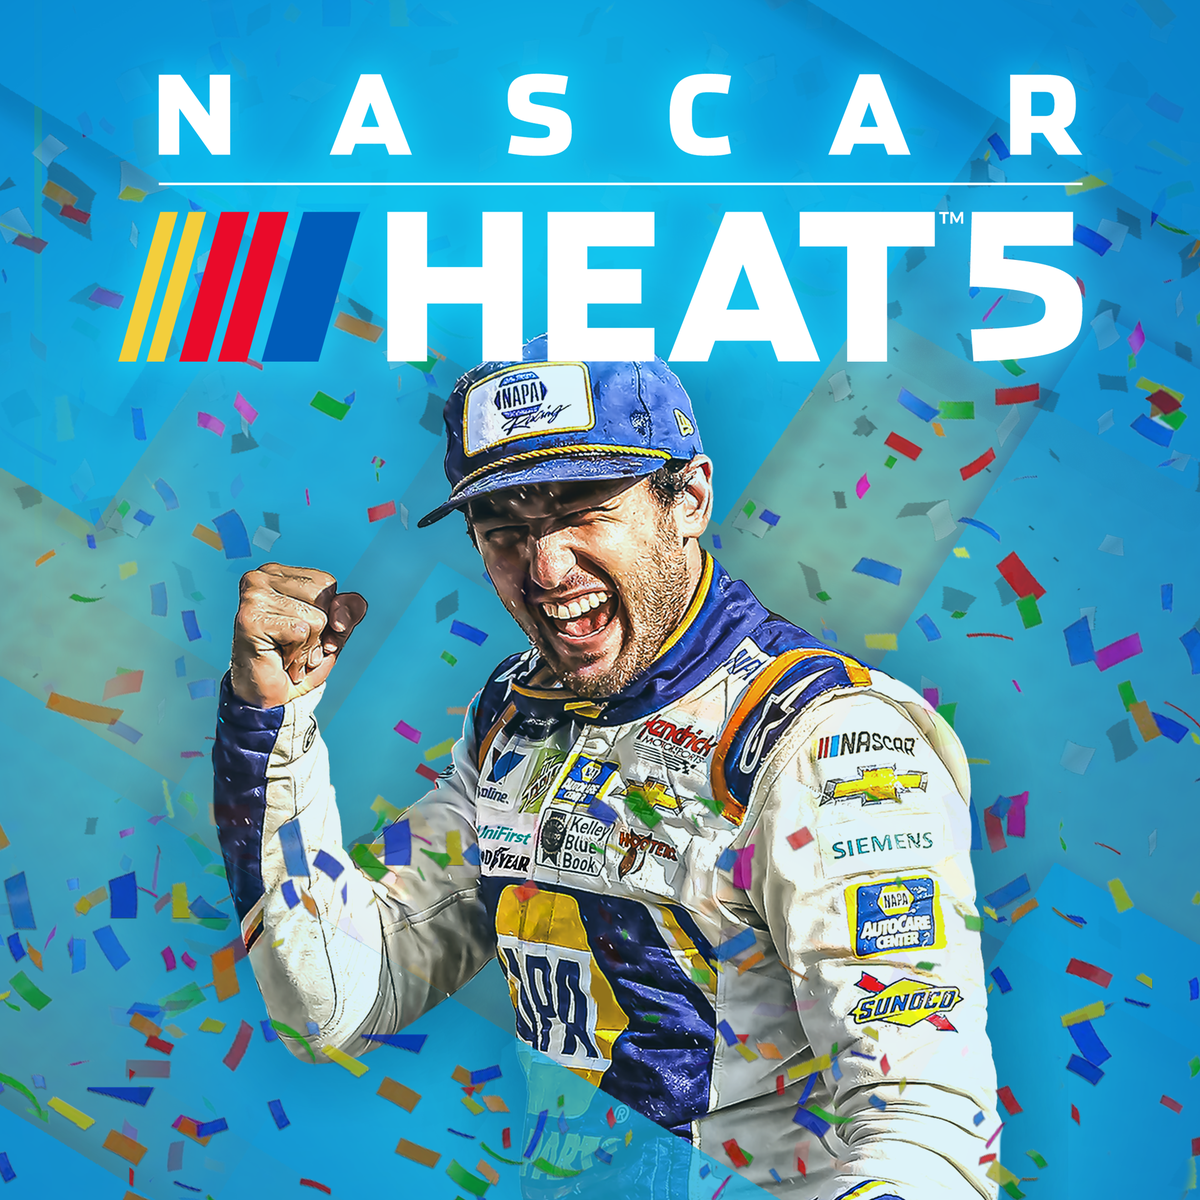 The new #NASCARHeat5 game, featuring @chaseelliott on the cover, is officially out! 🔥 To celebrate, we are giving away two downloadable copies of the game. Like and RT for a chance to win! 🎉